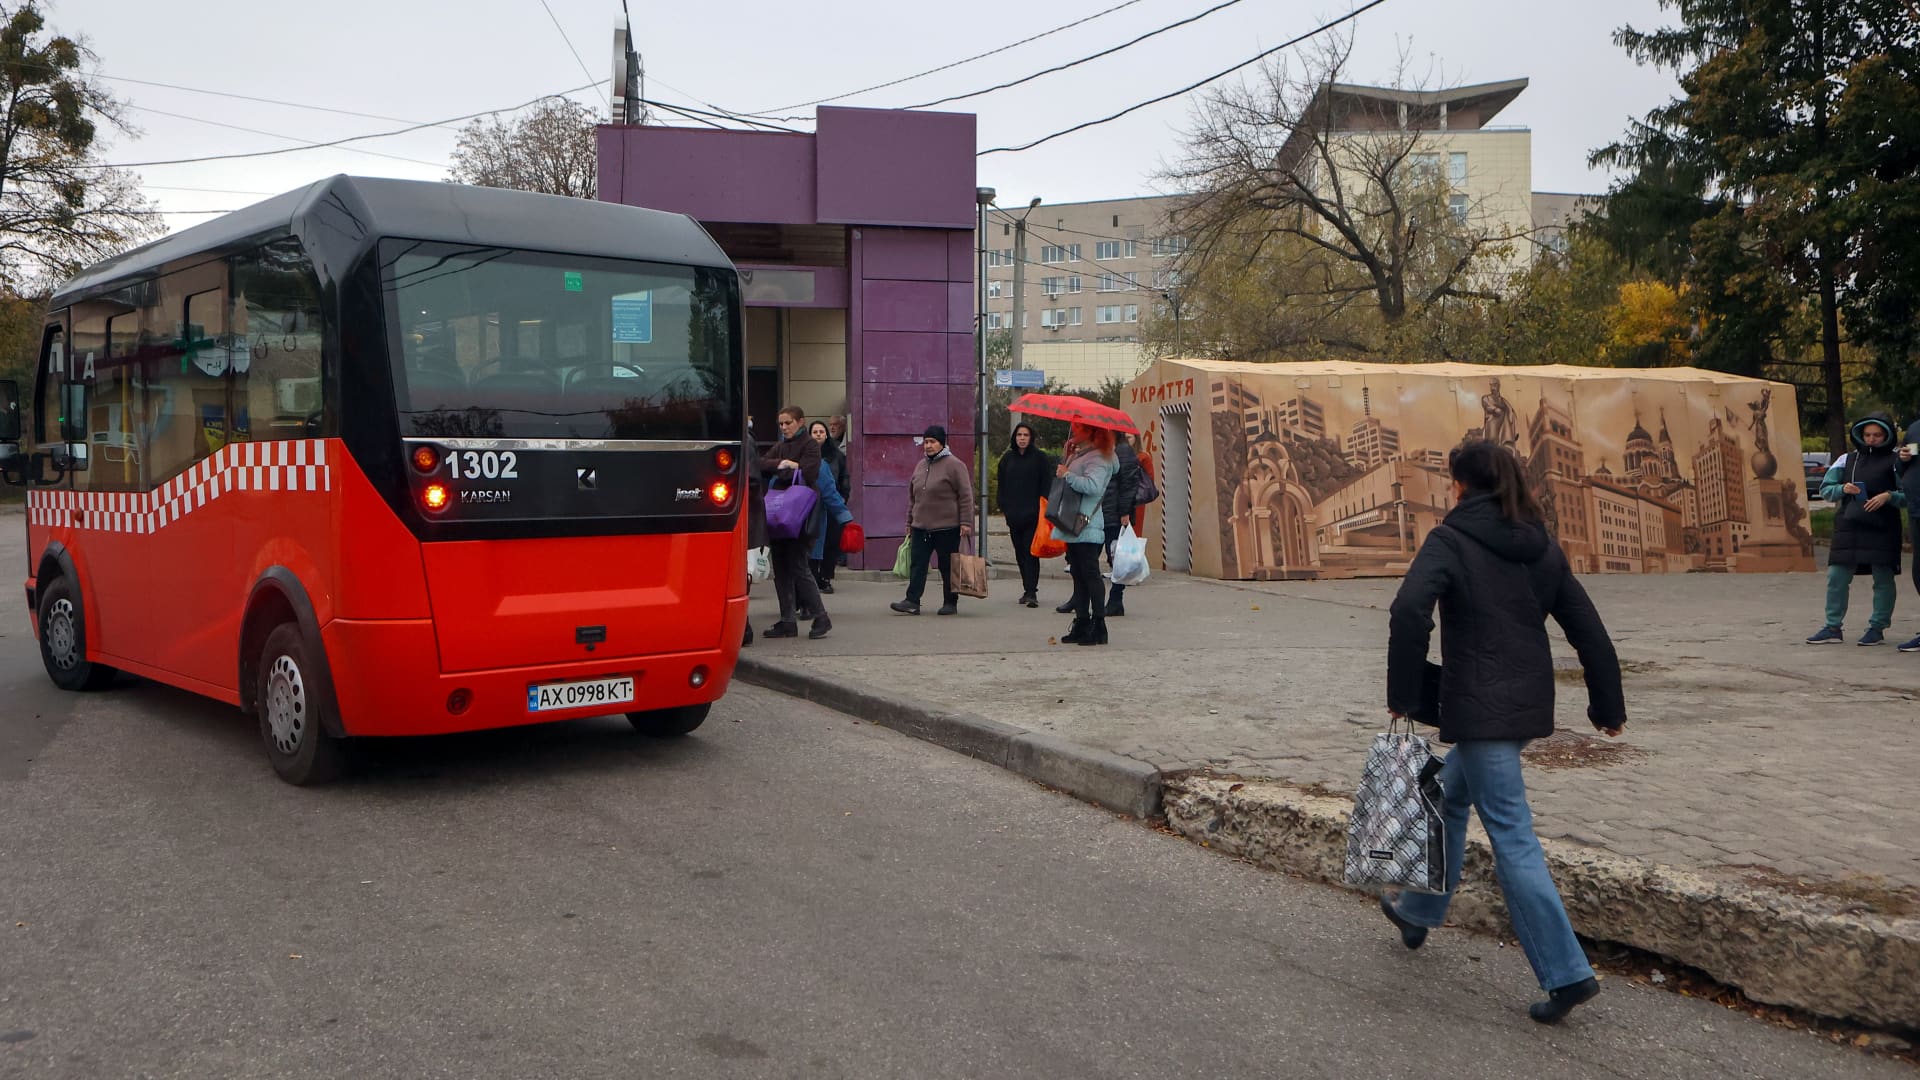 A bus is seen at a public transport stop where a concrete shelter was installed, Kharkiv, norheastern Ukraine. 